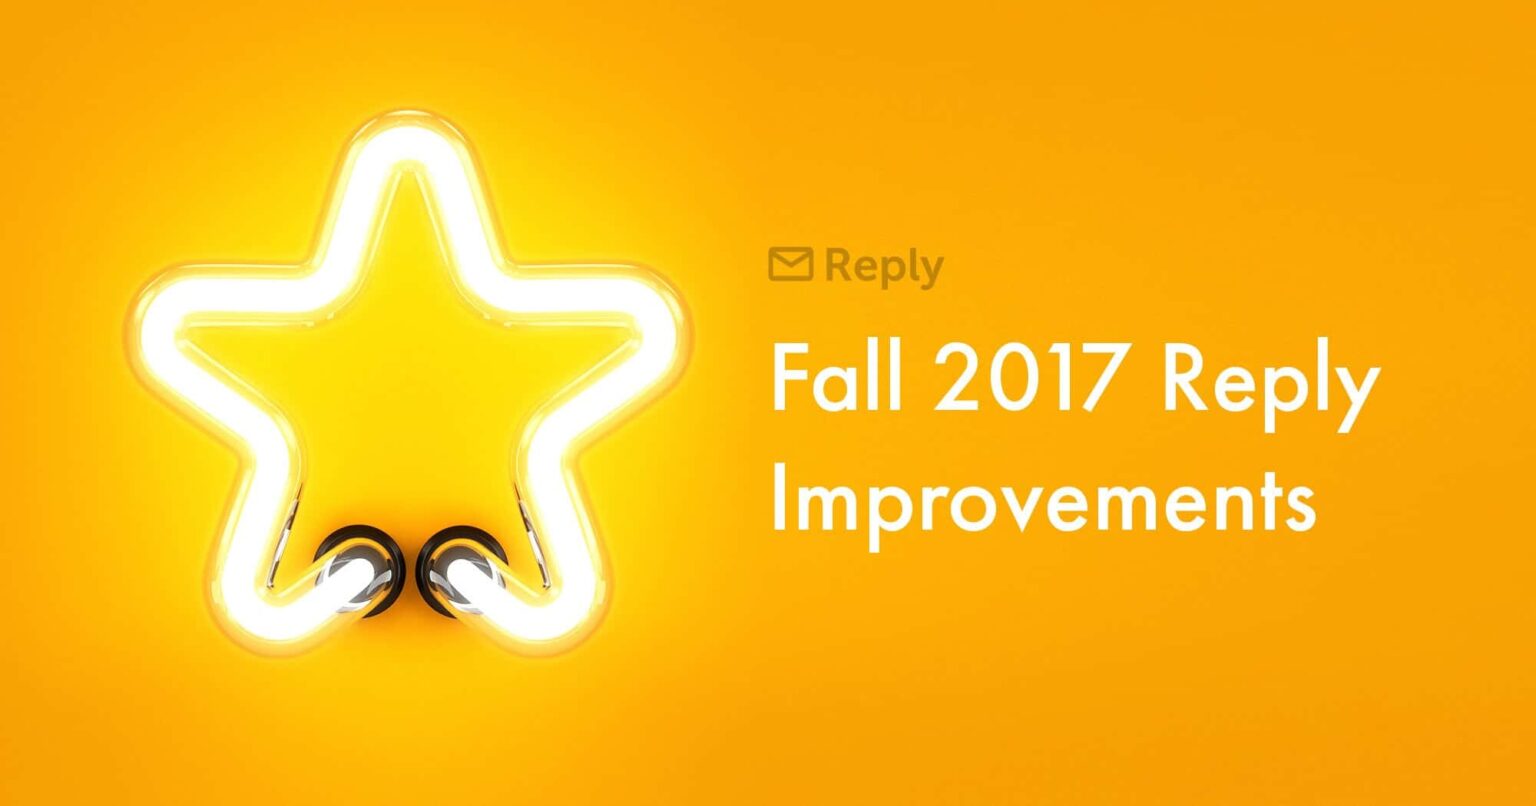 Fall 2017 Reply Improvements